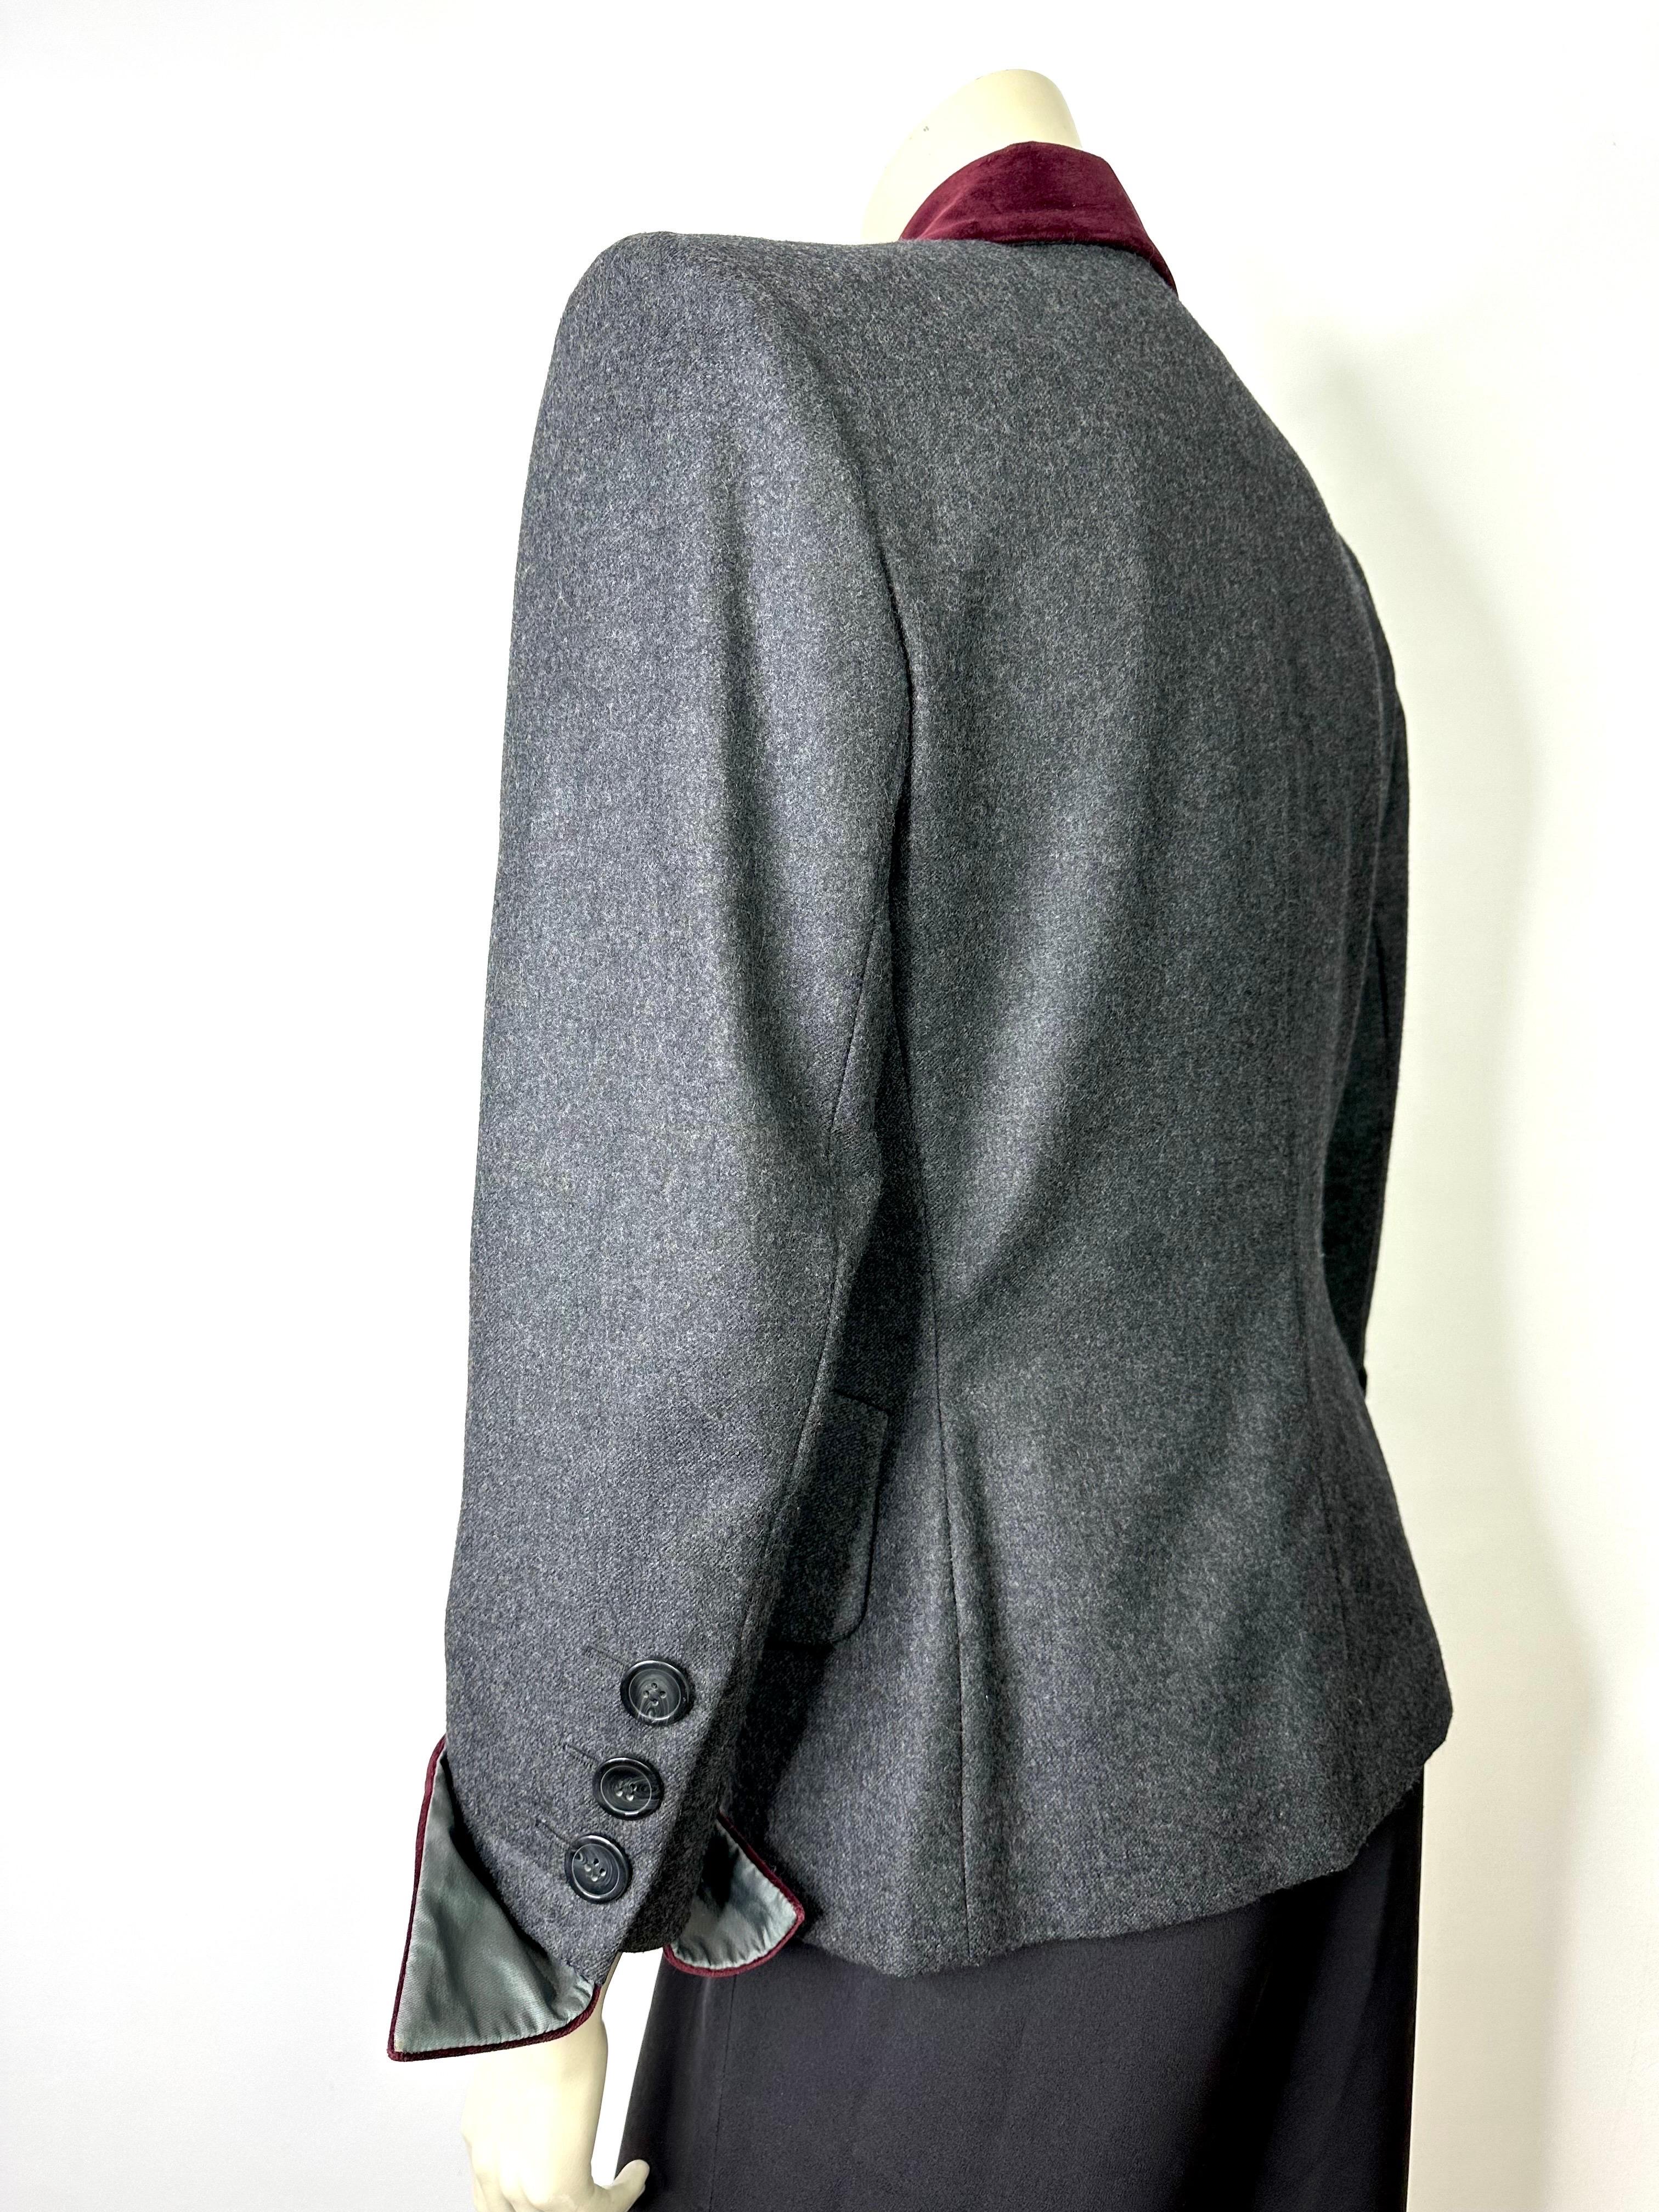 Vintage Yves saint Laurent grey wool blazer from 1990 For Sale 4